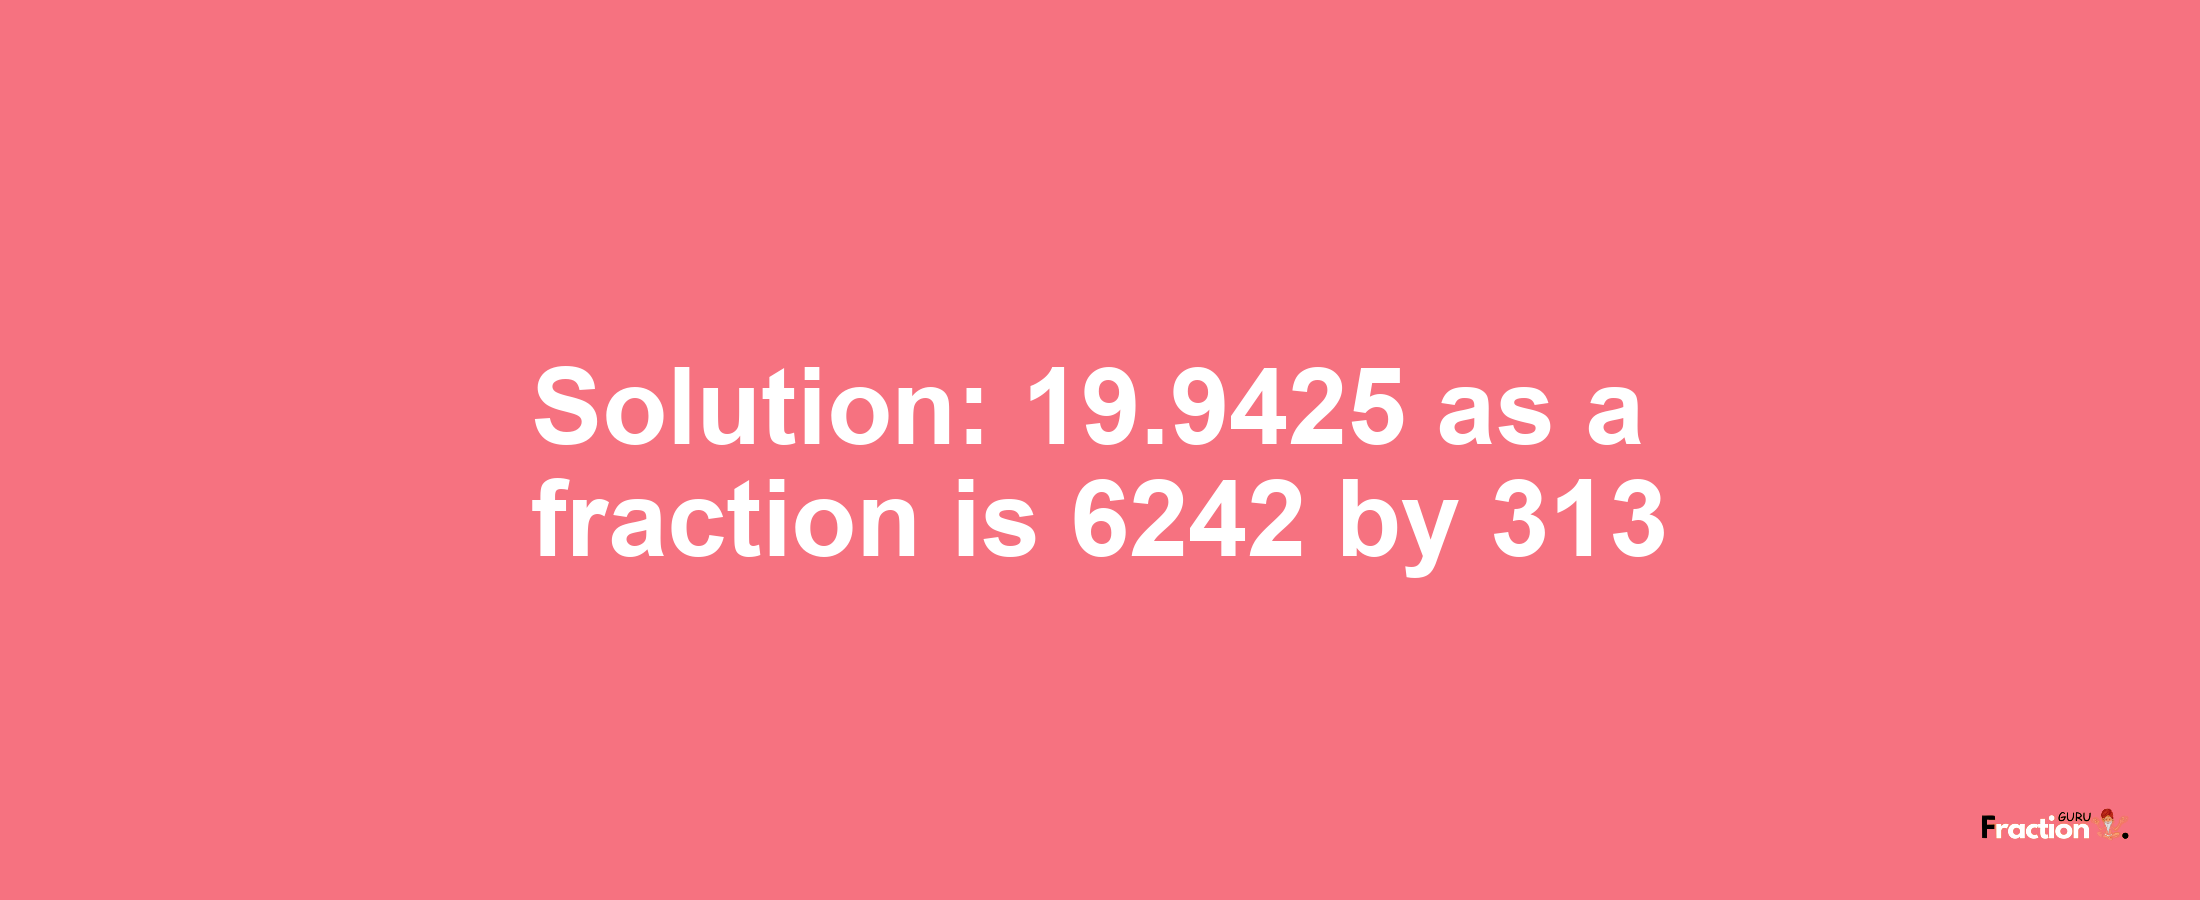 Solution:19.9425 as a fraction is 6242/313